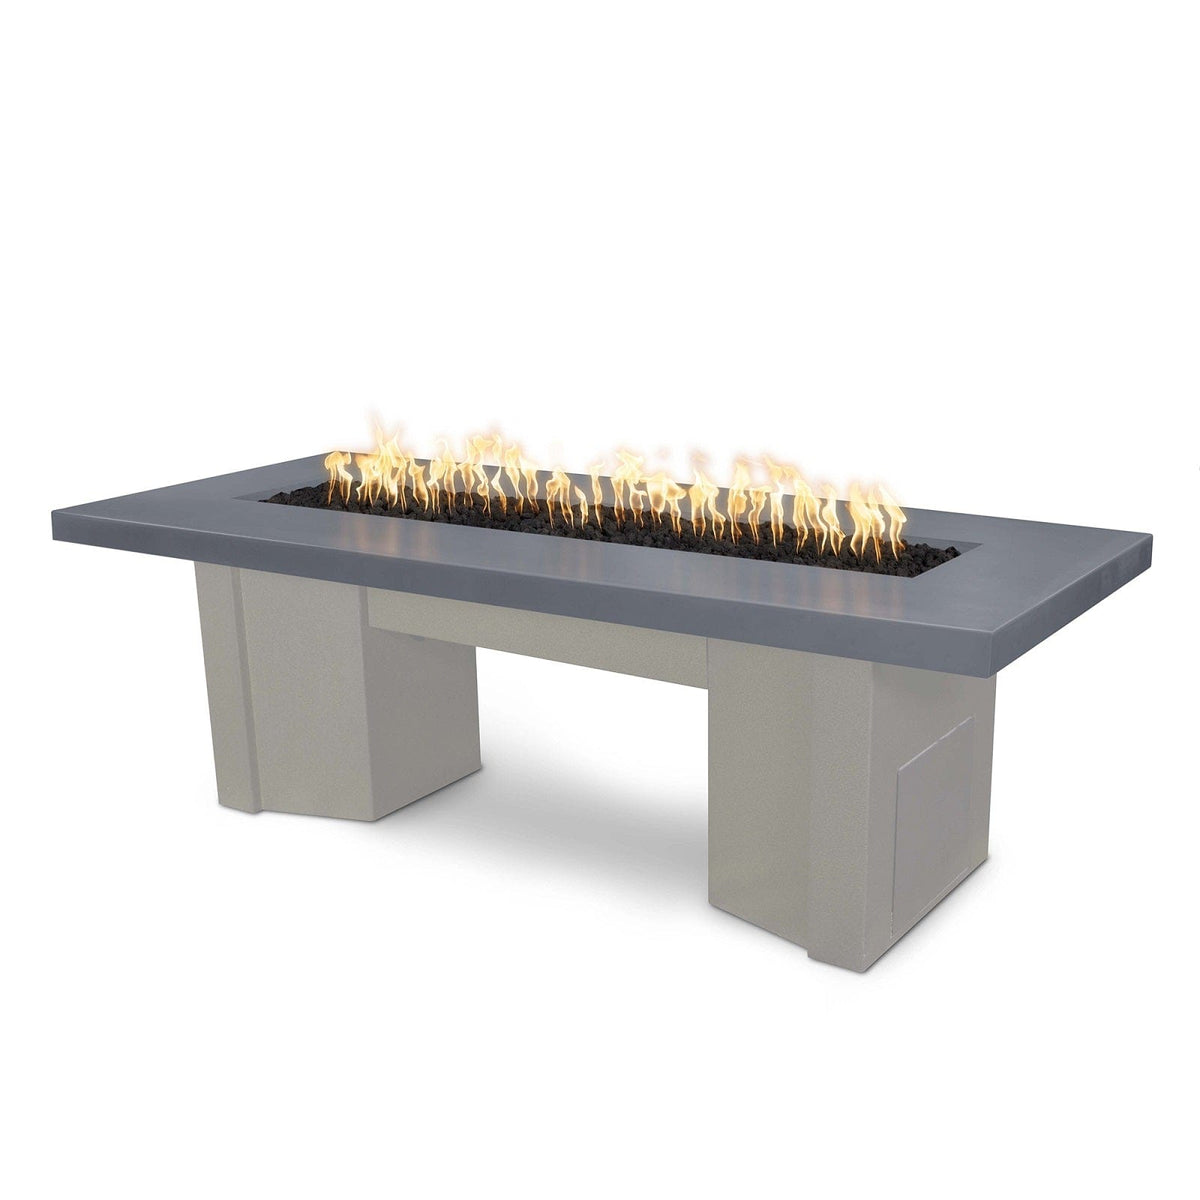 The Outdoor Plus Fire Features Gray (-GRY) / Pewter Powder Coated Steel (-PEW) The Outdoor Plus 78&quot; Alameda Fire Table Smooth Concrete in Liquid Propane - 110V Plug &amp; Play Electronic Ignition / OPT-ALMGFRC78EKIT-LP